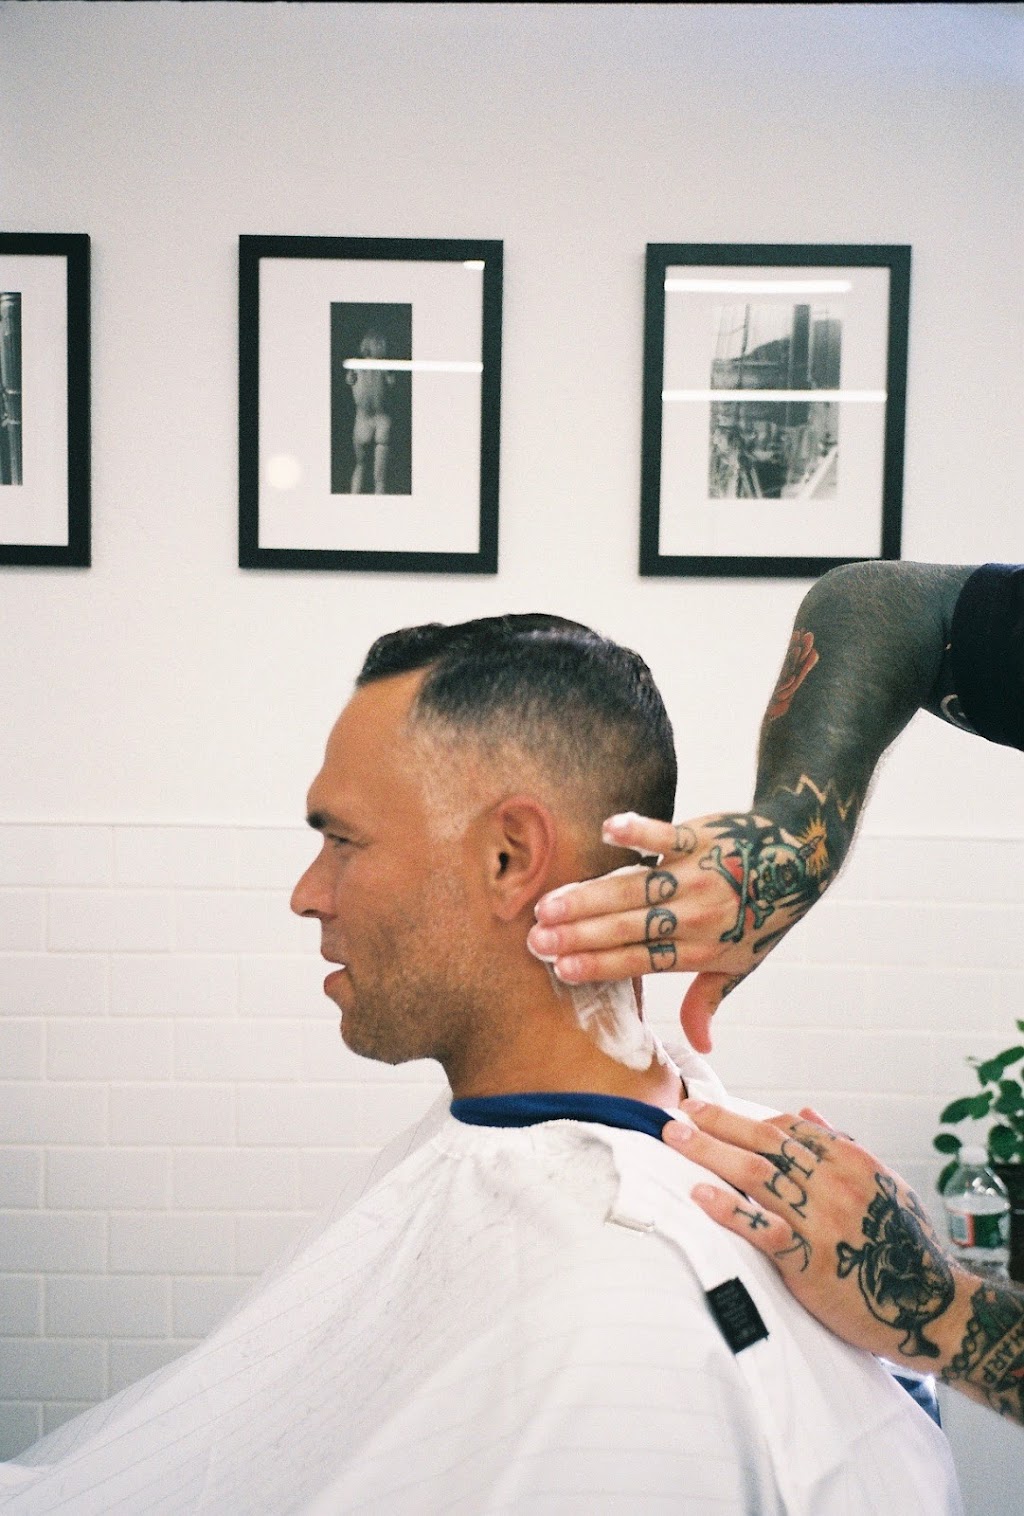 Brother Barber | 1 W Allendale Ave, Allendale, NJ 07401 | Phone: (201) 962-3025